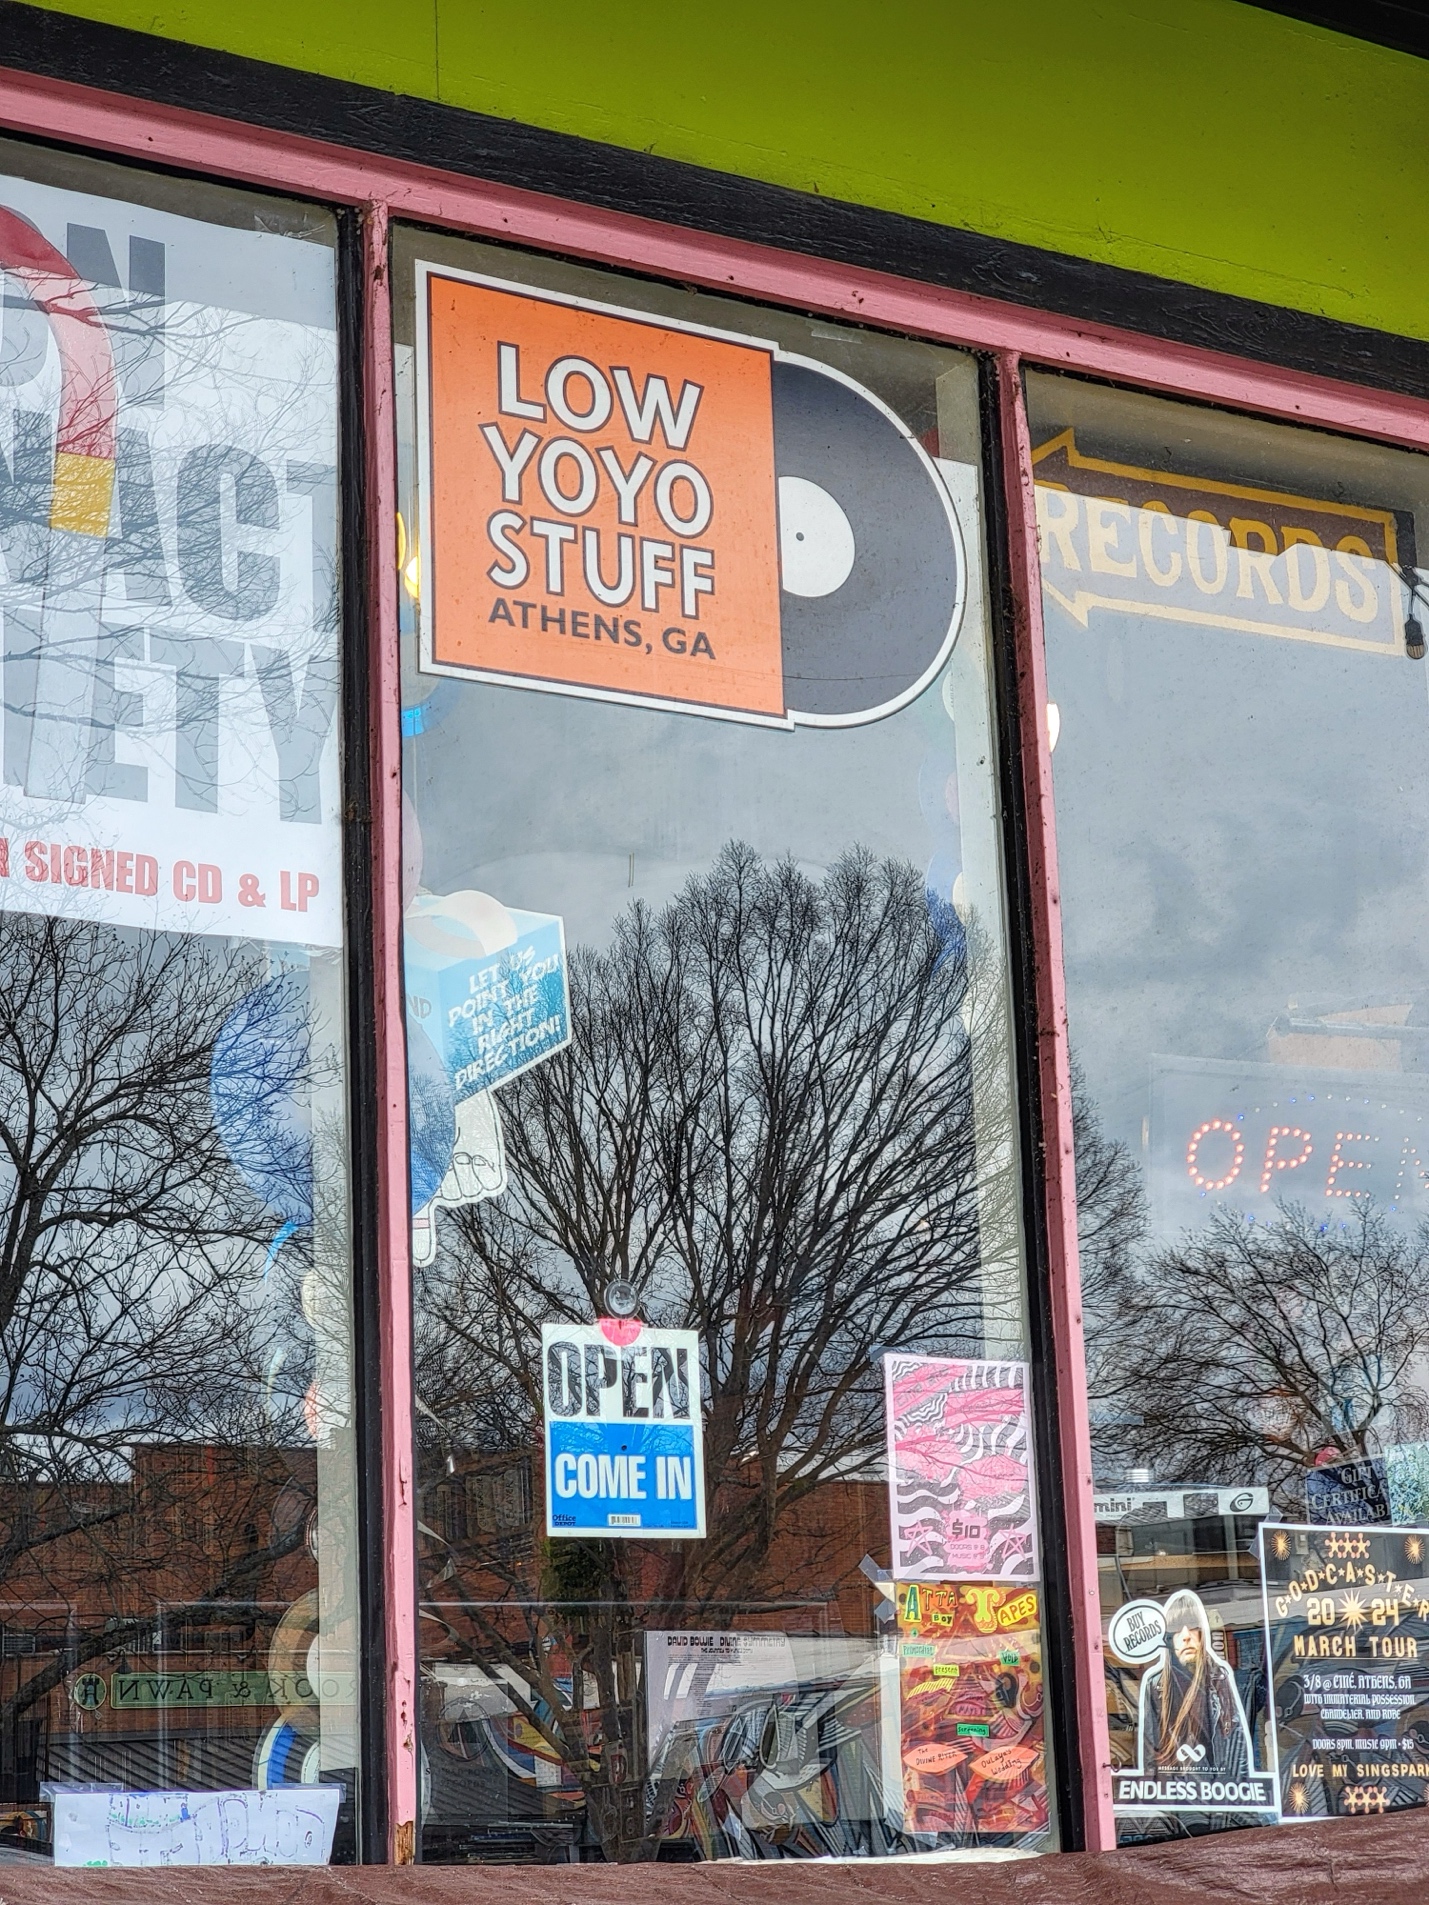 A storefront window with signs on it

Description automatically generated